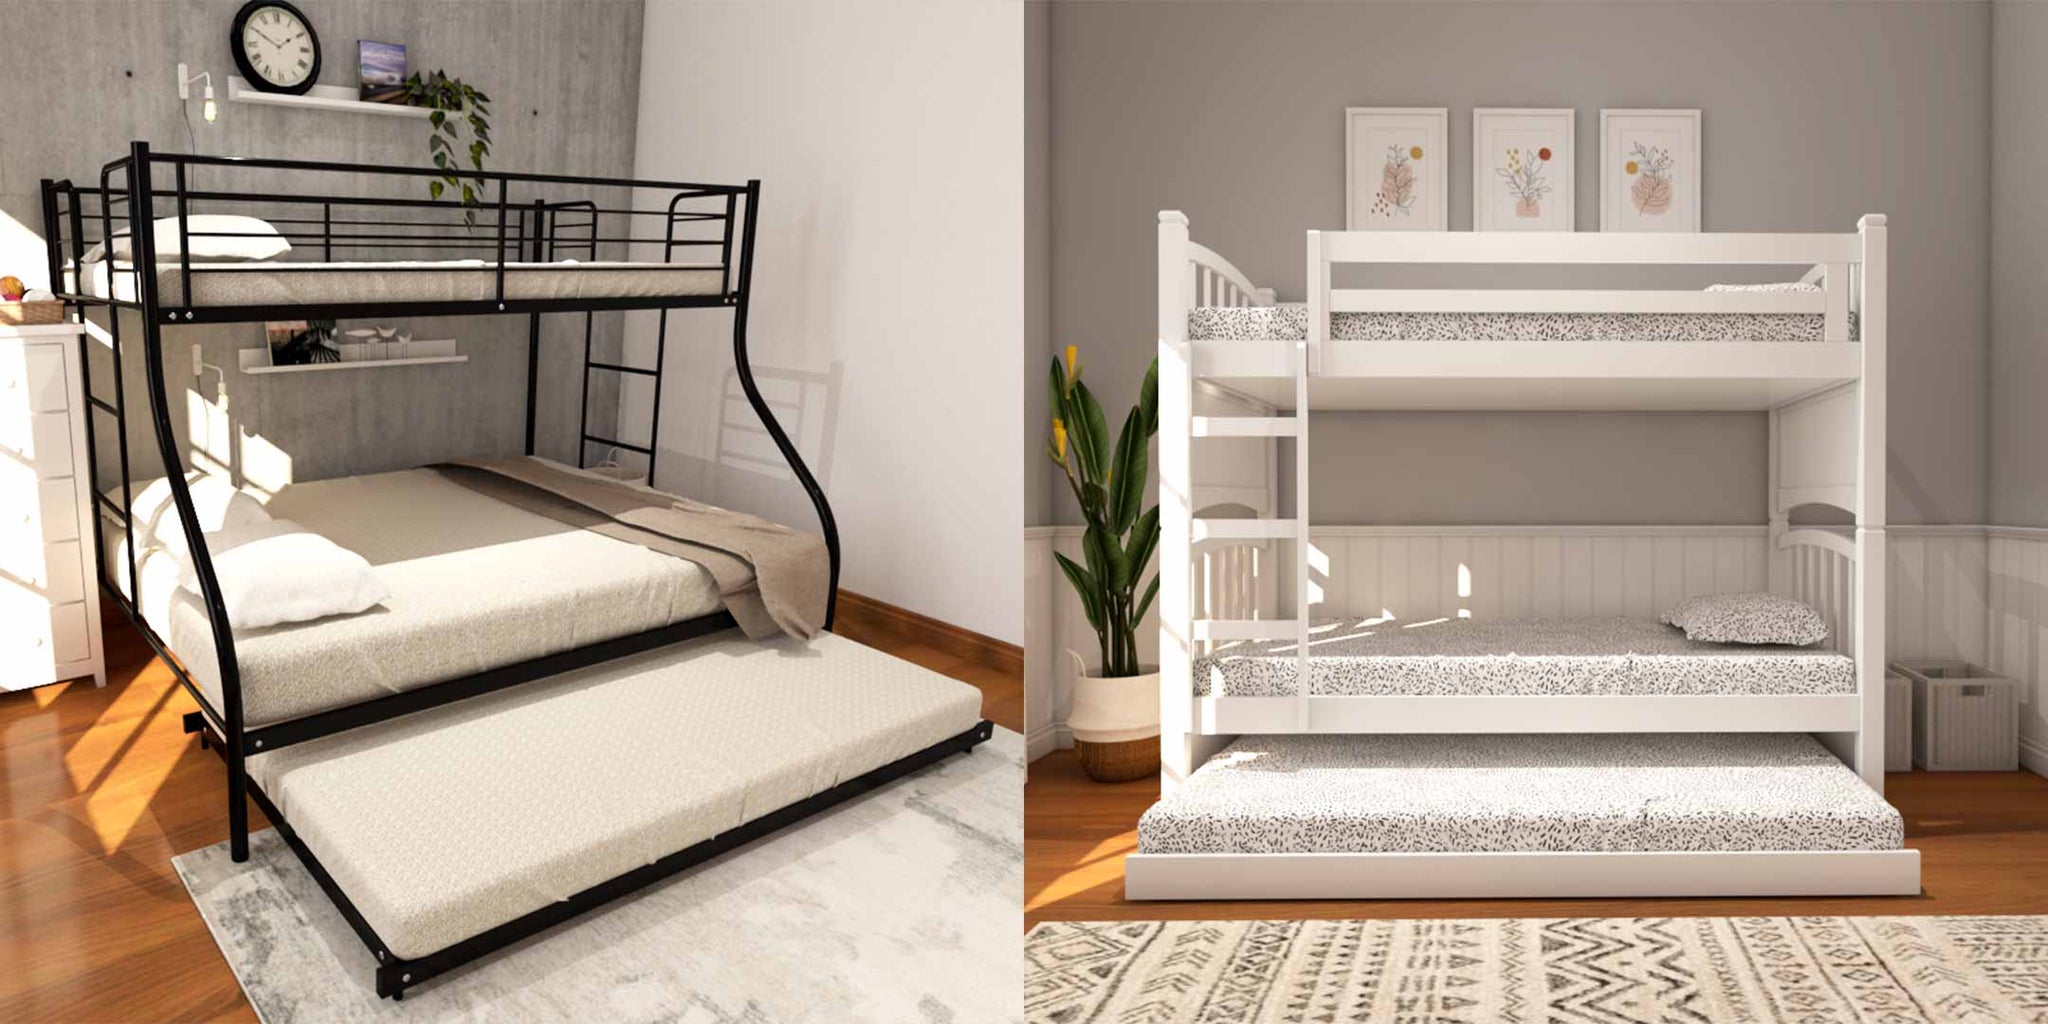 Things to Consider When Purchasing a Bunk Bed